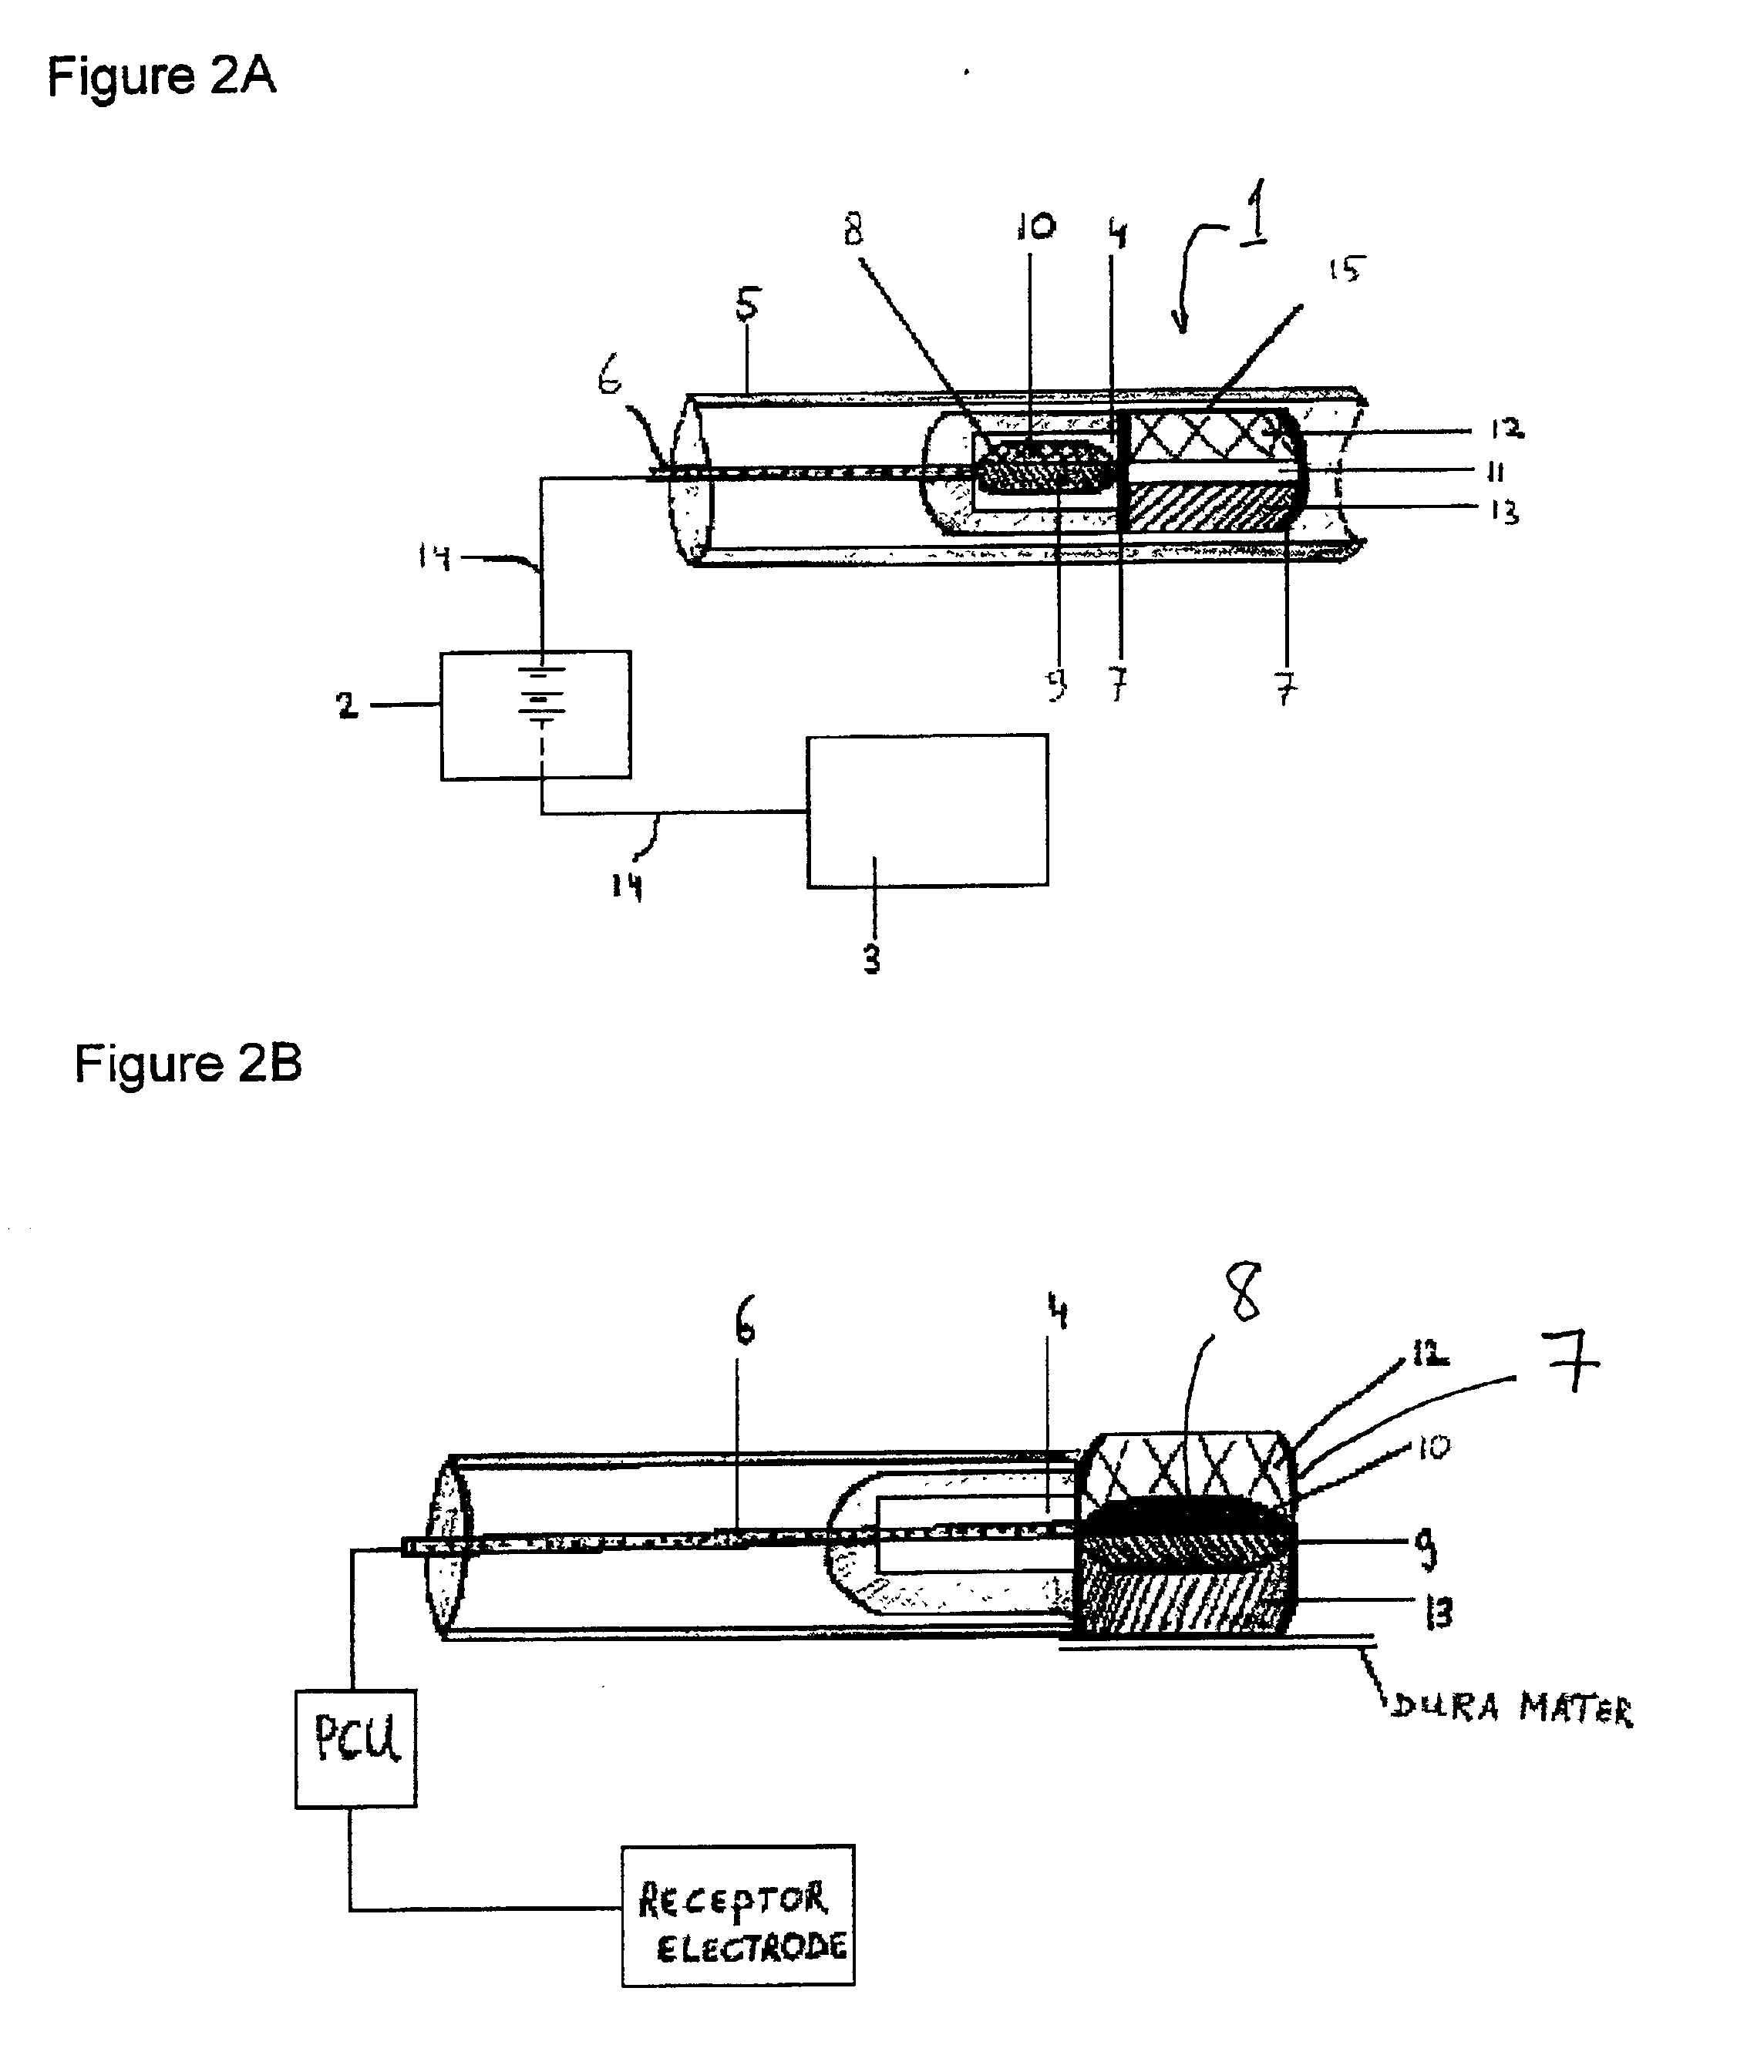 Method and device for enhanced delivery of a biologically active agent through the spinal spaces into the central nervous system of a mammal